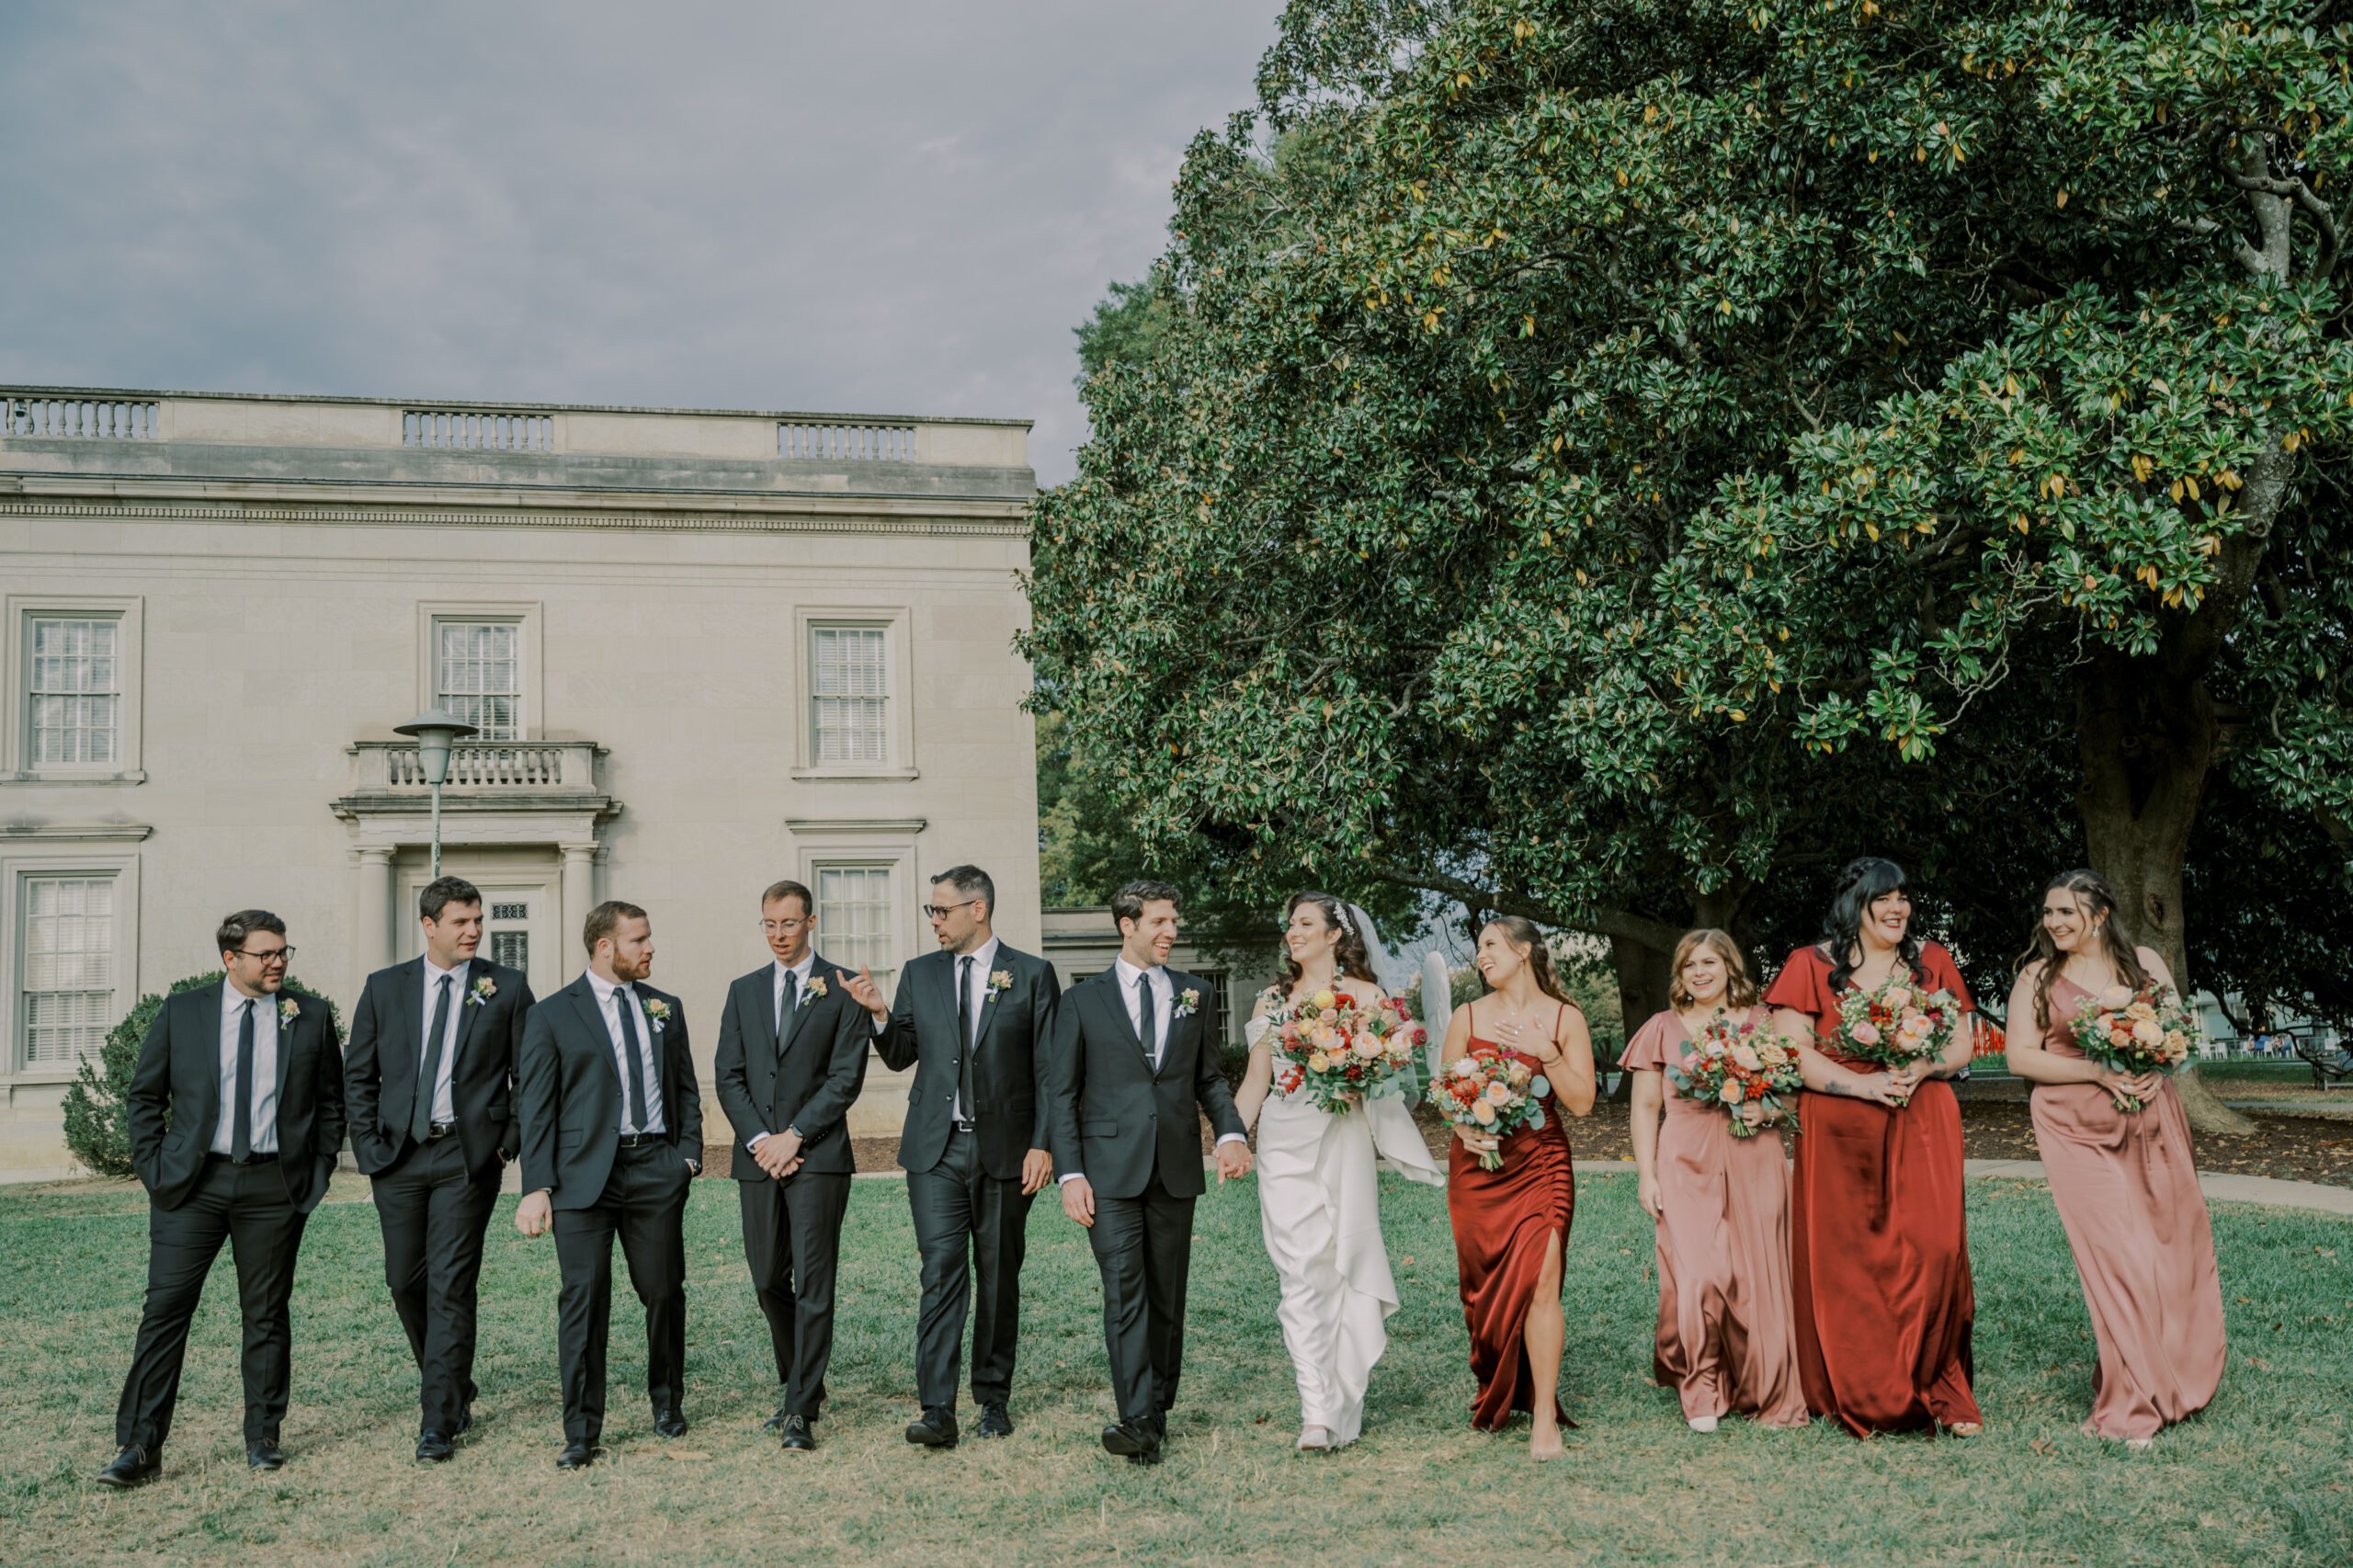 Bride and groom walking in grass with their groomsmen and bridesmaids on either sides of them, all looking at one another smiling and chatting